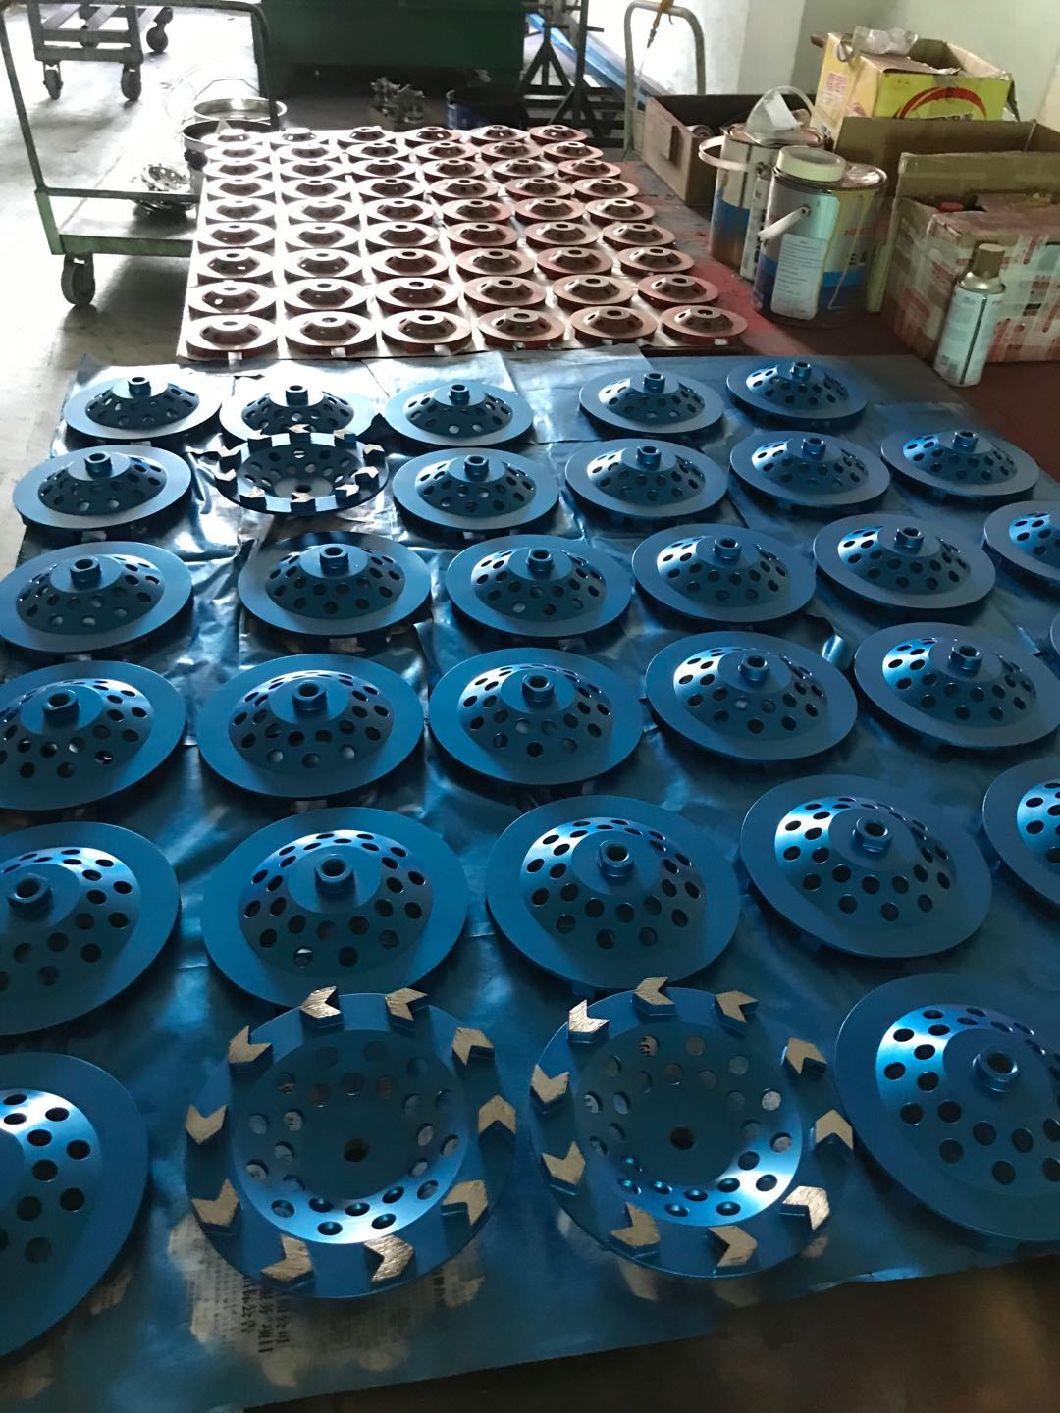 5 Inch PCD Diamond Cup Wheel for Concrete Coating